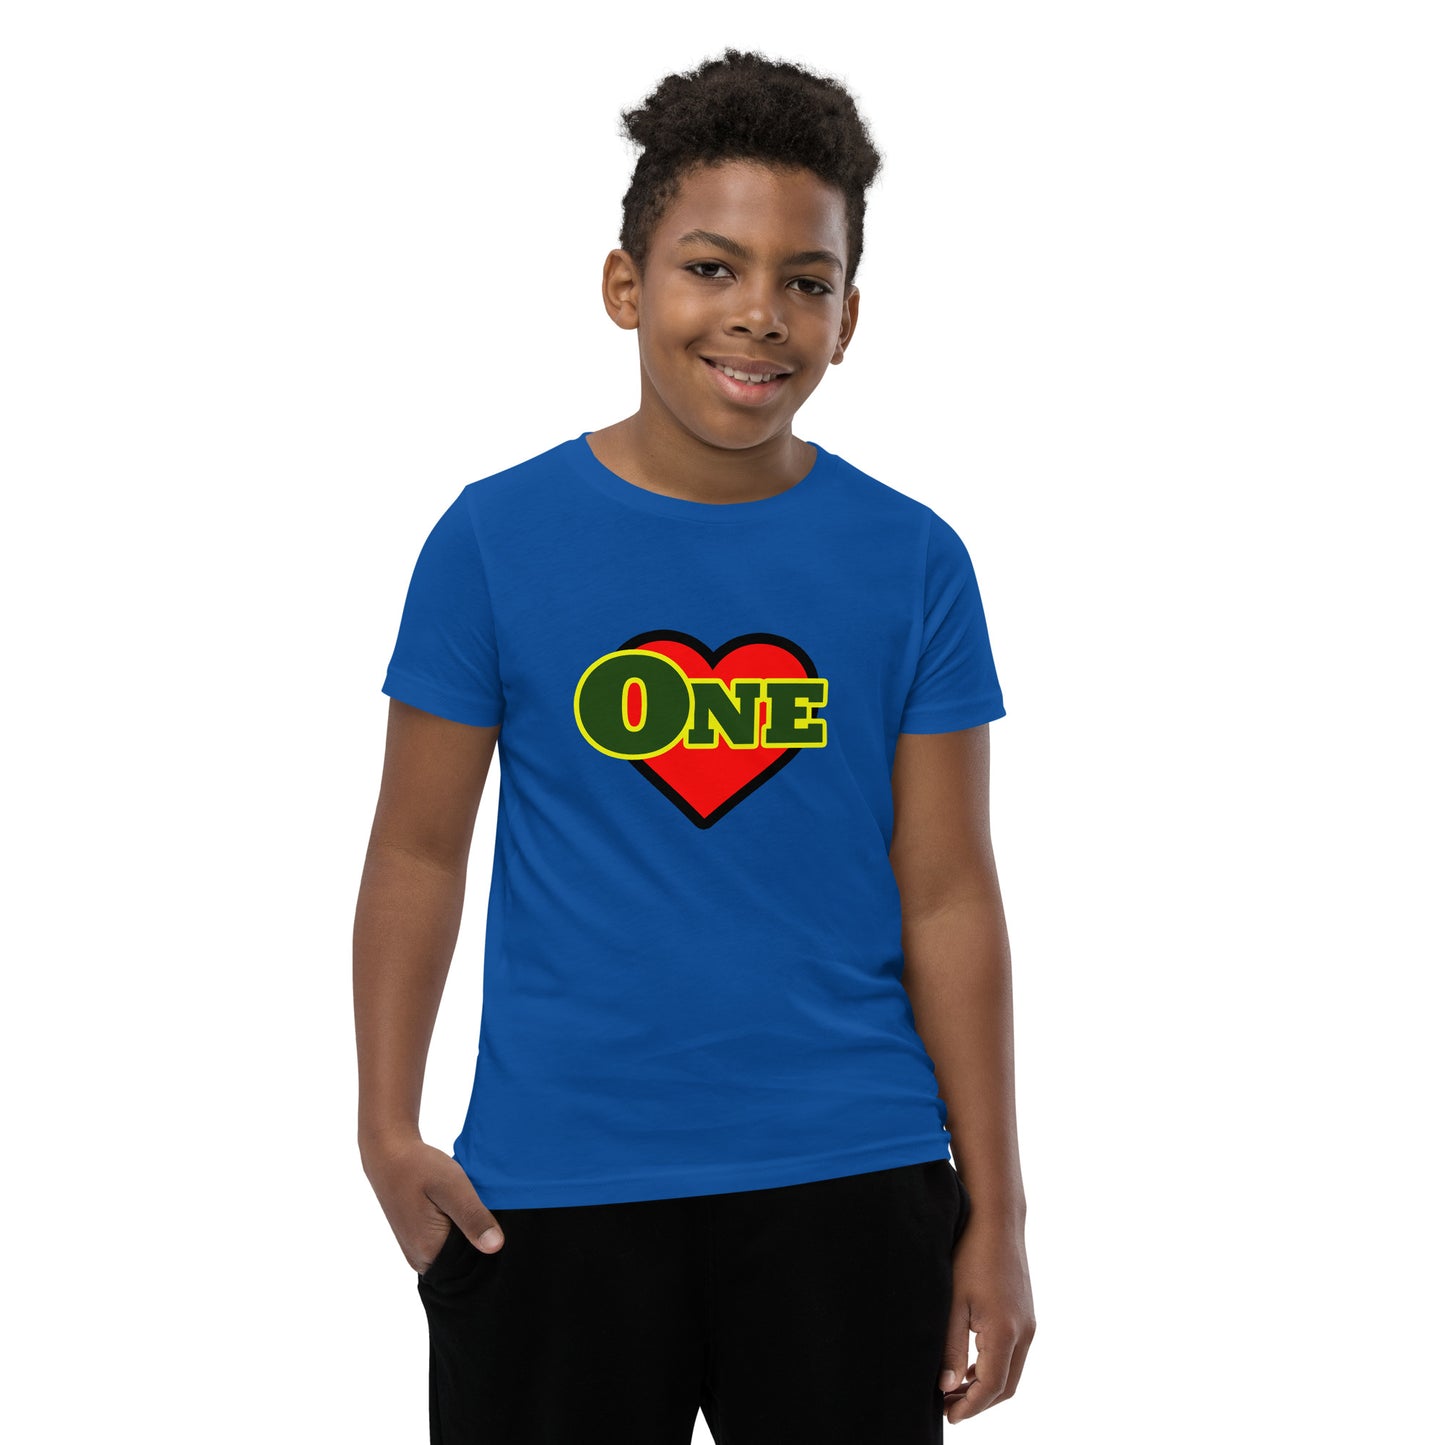 Youth Short Sleeve "One Love" T-Shirt